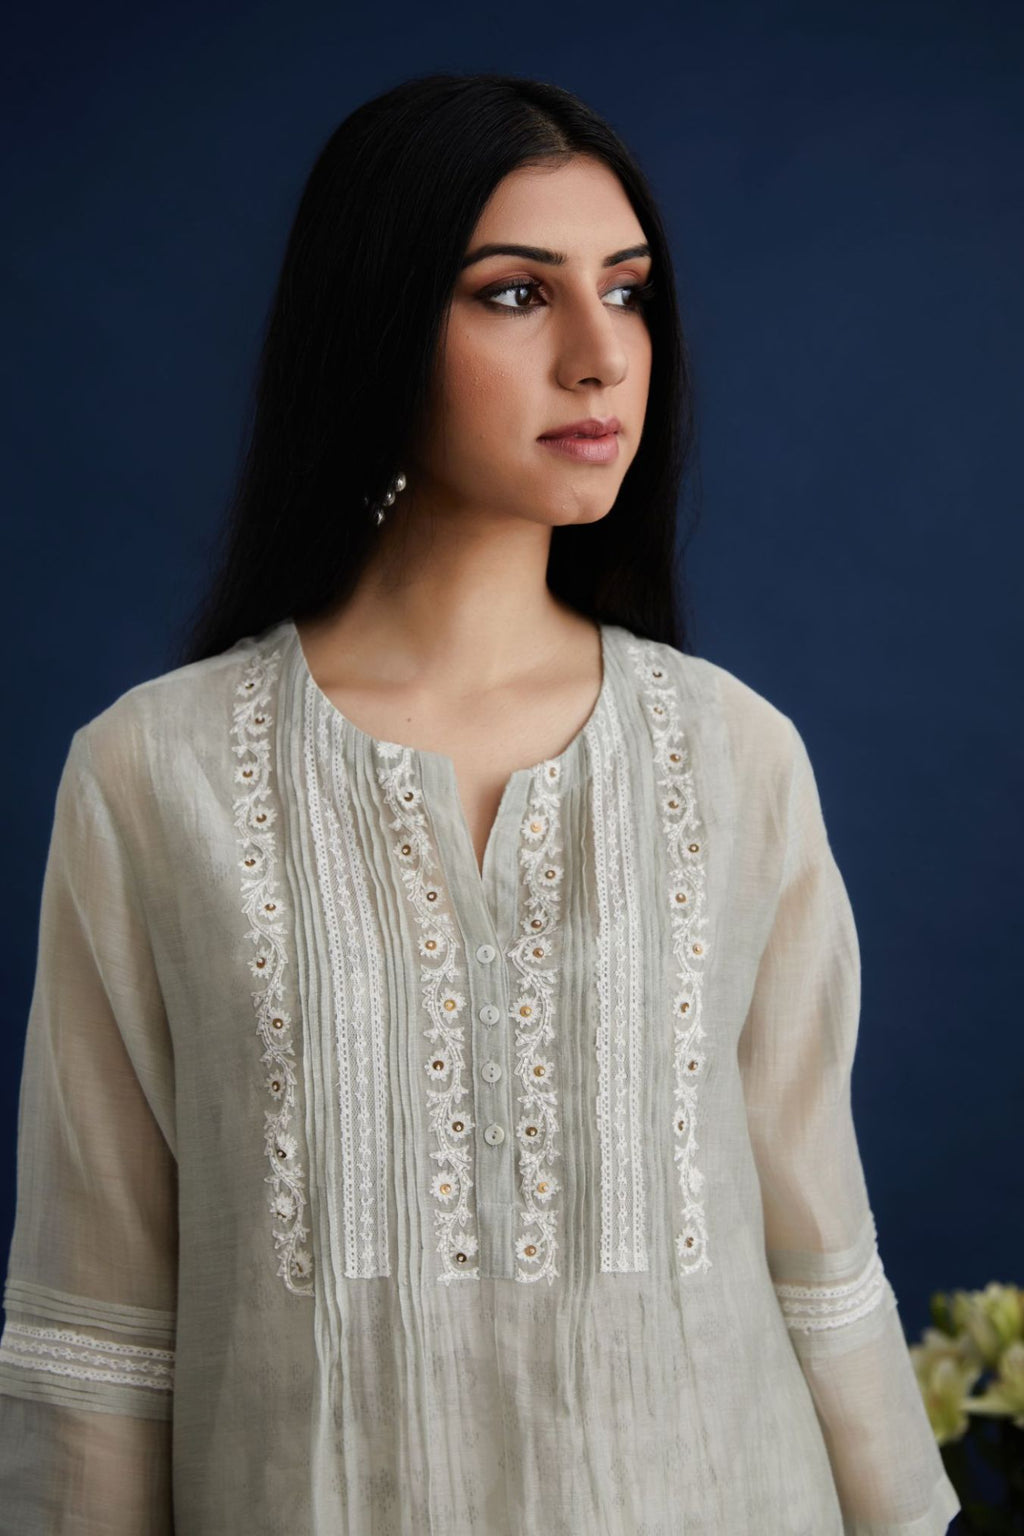 Double layered cotton chanderi kurta set with lace and pintucks detailing and hand block printed cotton slip inside